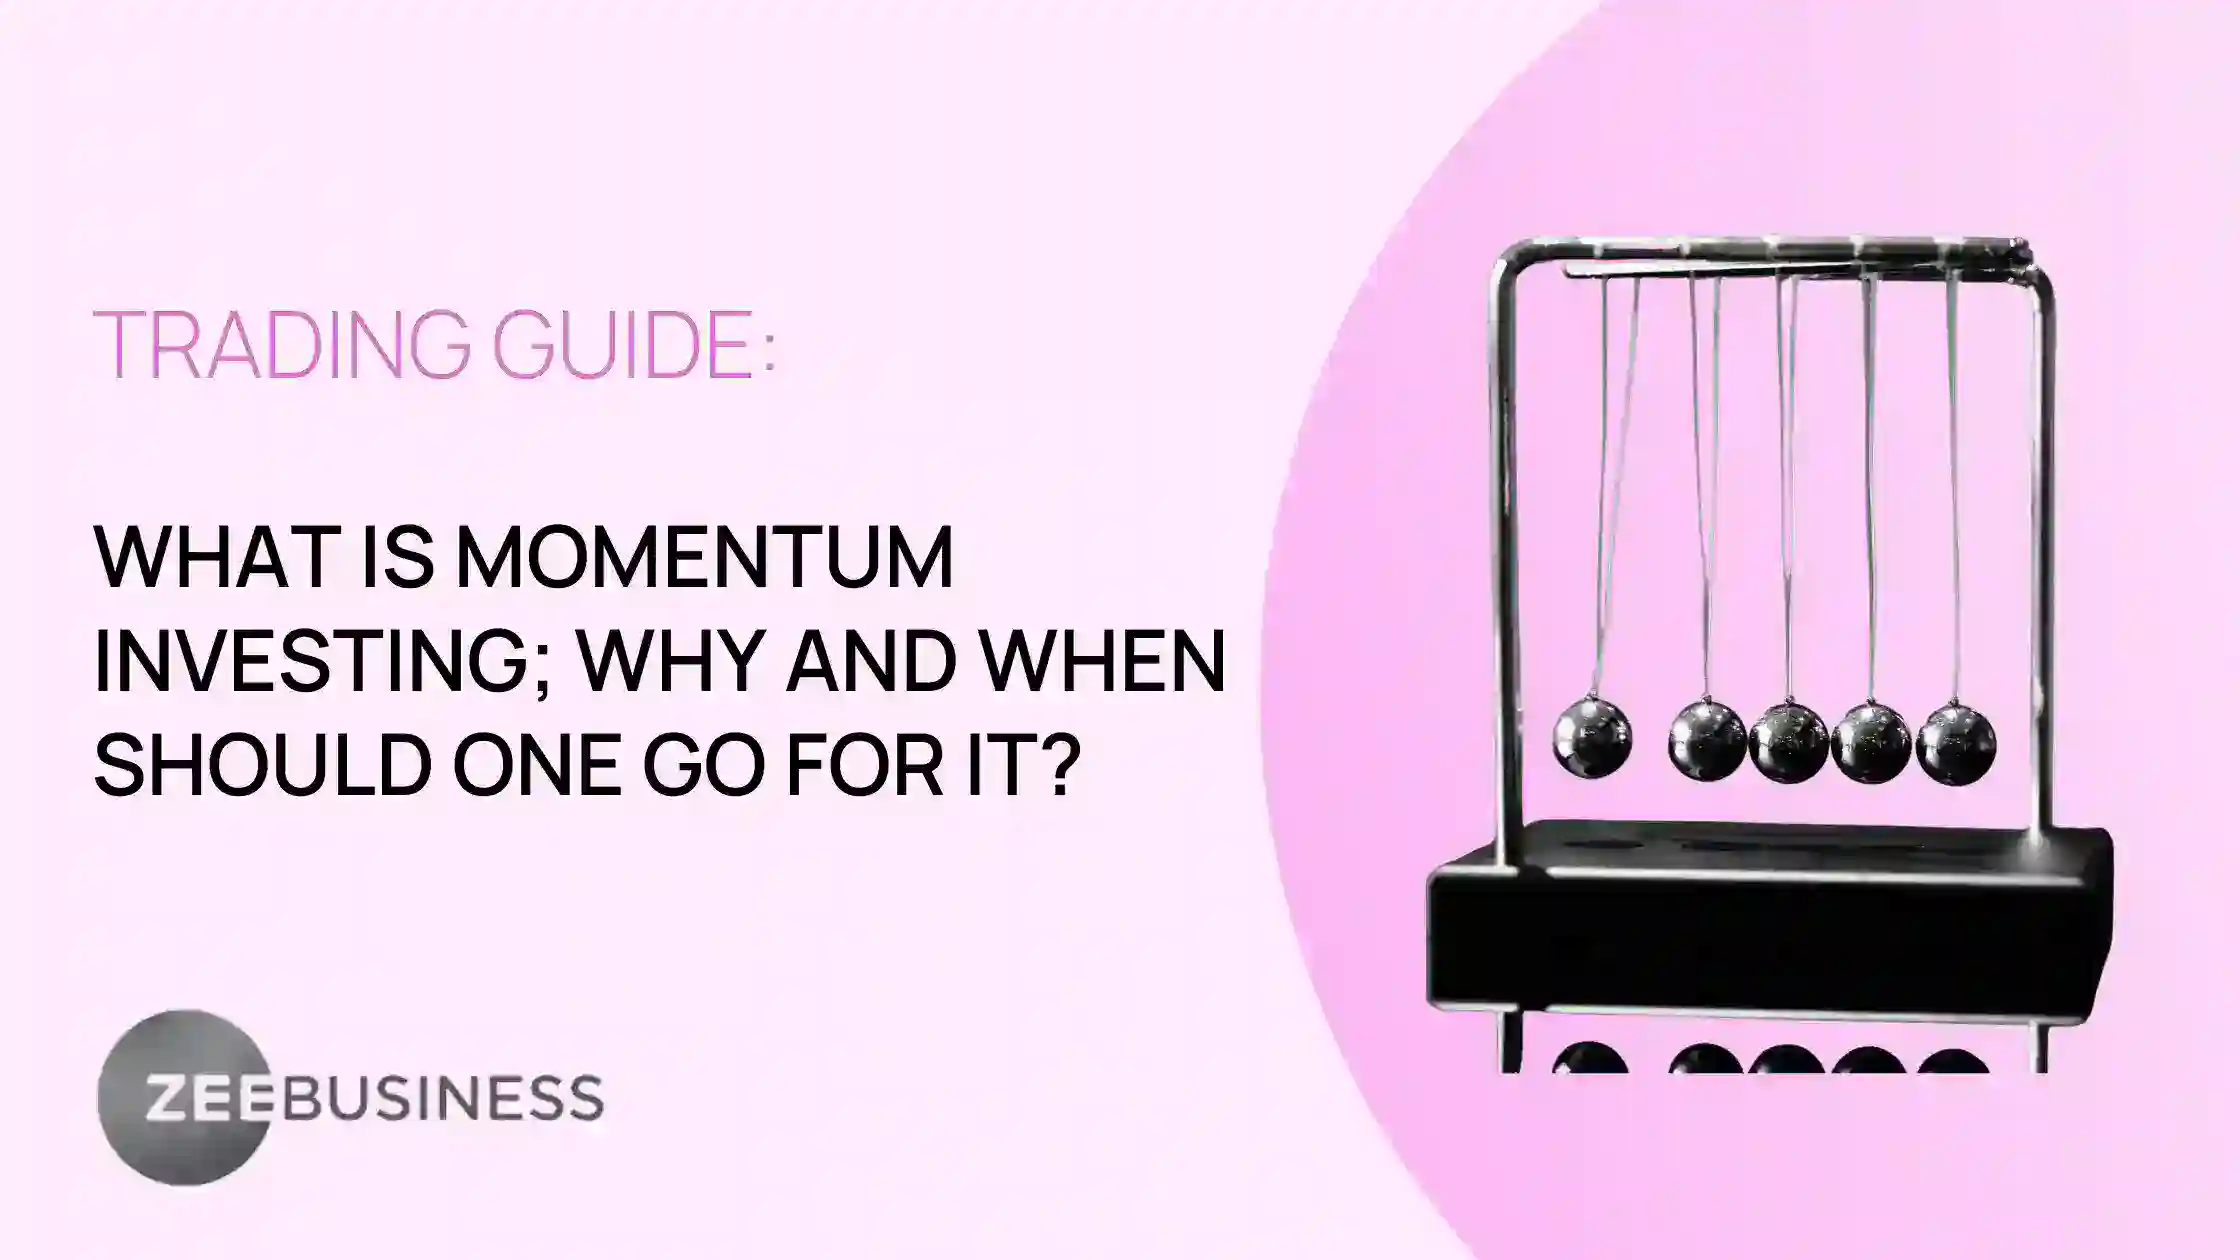 Trading Guide: What is Momentum Investing; Why and when should one go for it?